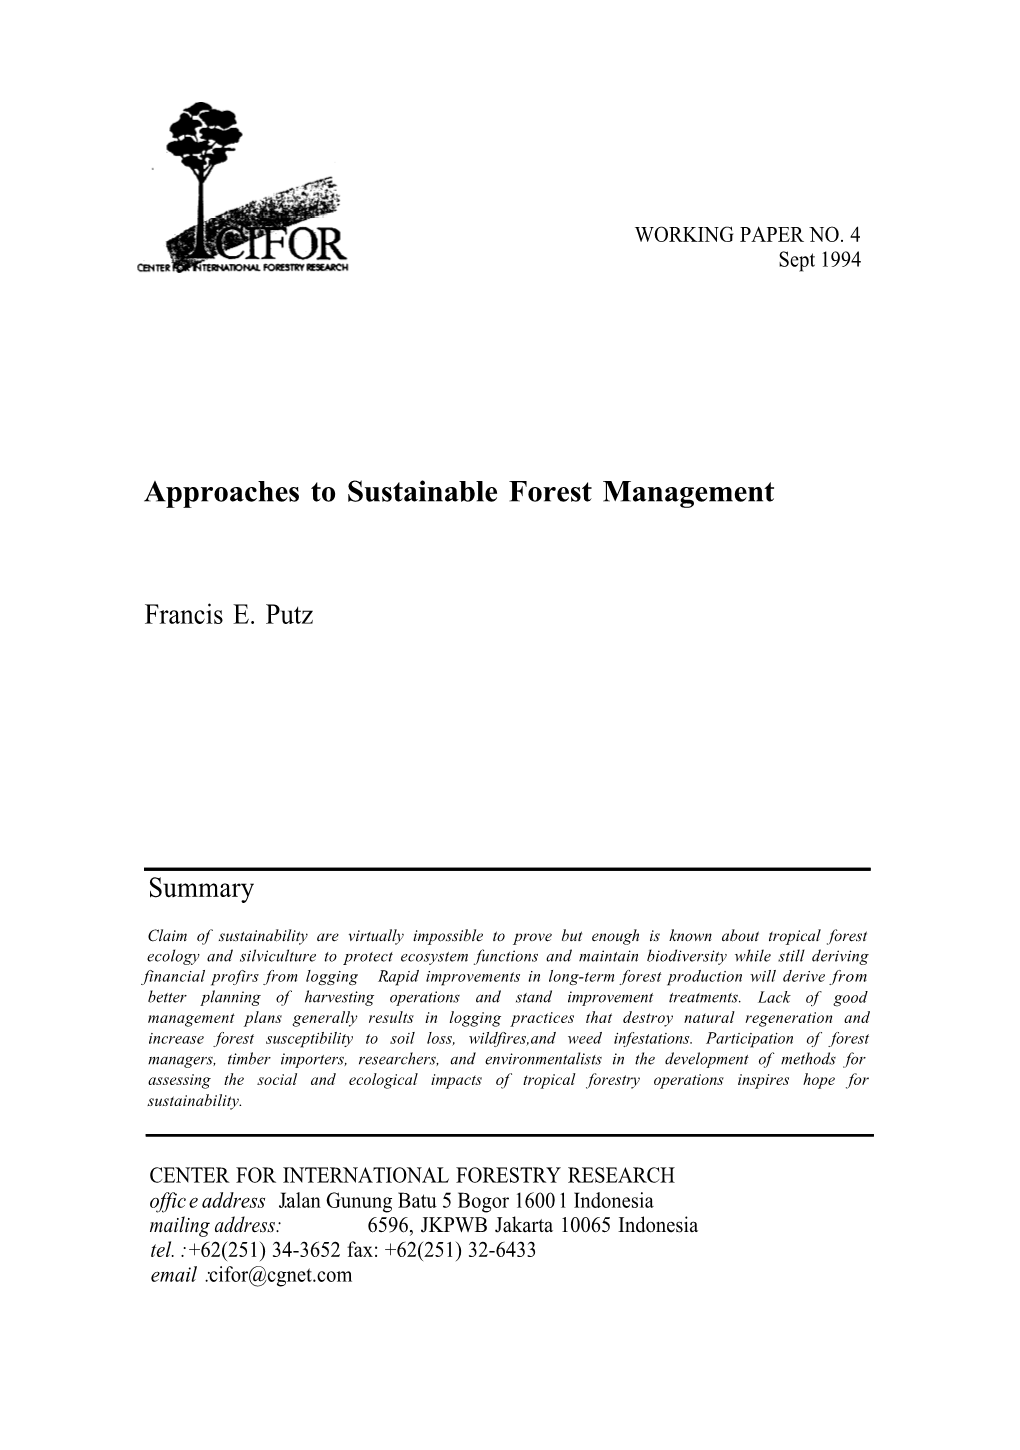 Approaches to Sustainable Forest Management